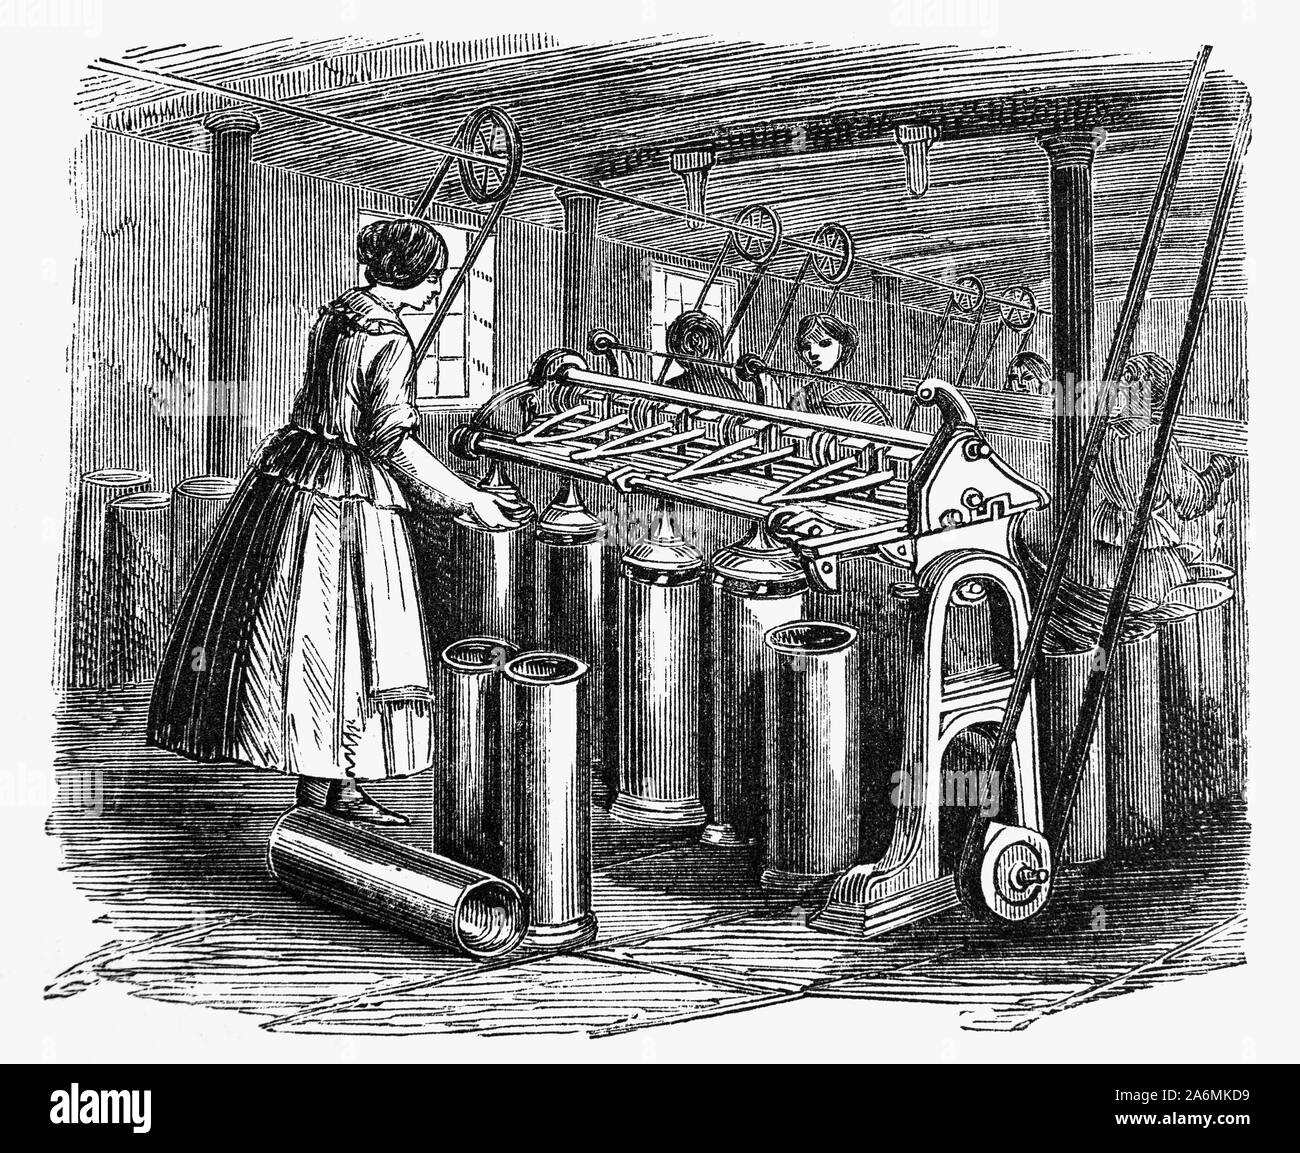 The drawing frame or spinning frame, is a machine for drawing, twisting, and winding yarn. Invented in the 1730s by Lewis Paul and John Wyatt, the spinning machine operated by drawing cotton or wool through pairs of successively faster rollers. It was eventually superseded by R. Arkwright’s water frame. Stock Photo